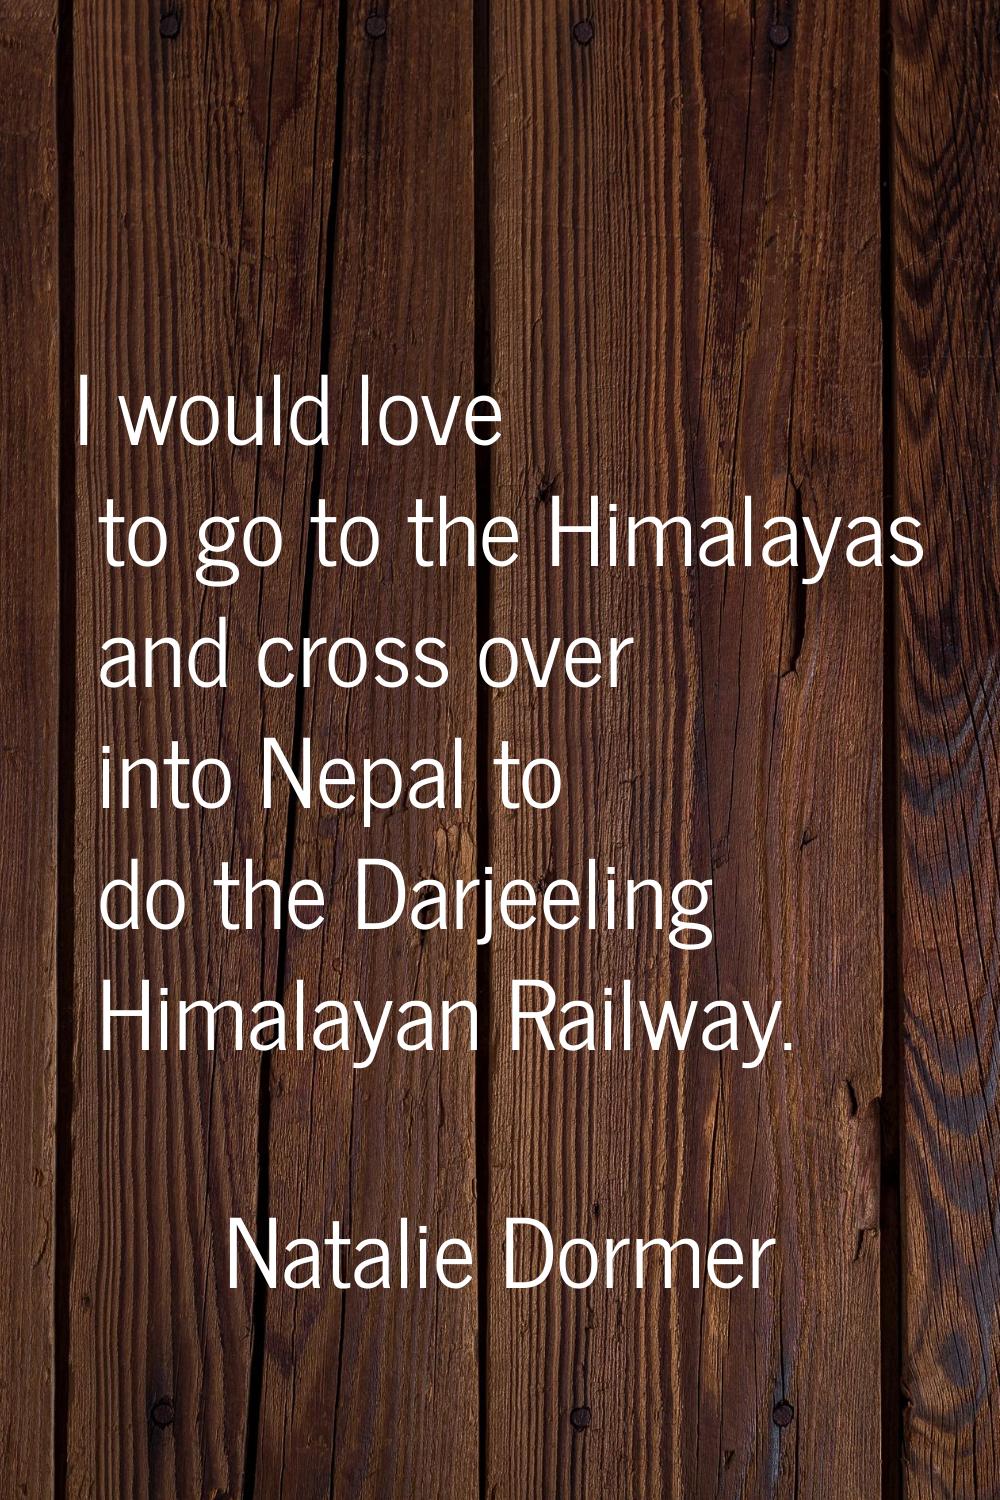 I would love to go to the Himalayas and cross over into Nepal to do the Darjeeling Himalayan Railwa